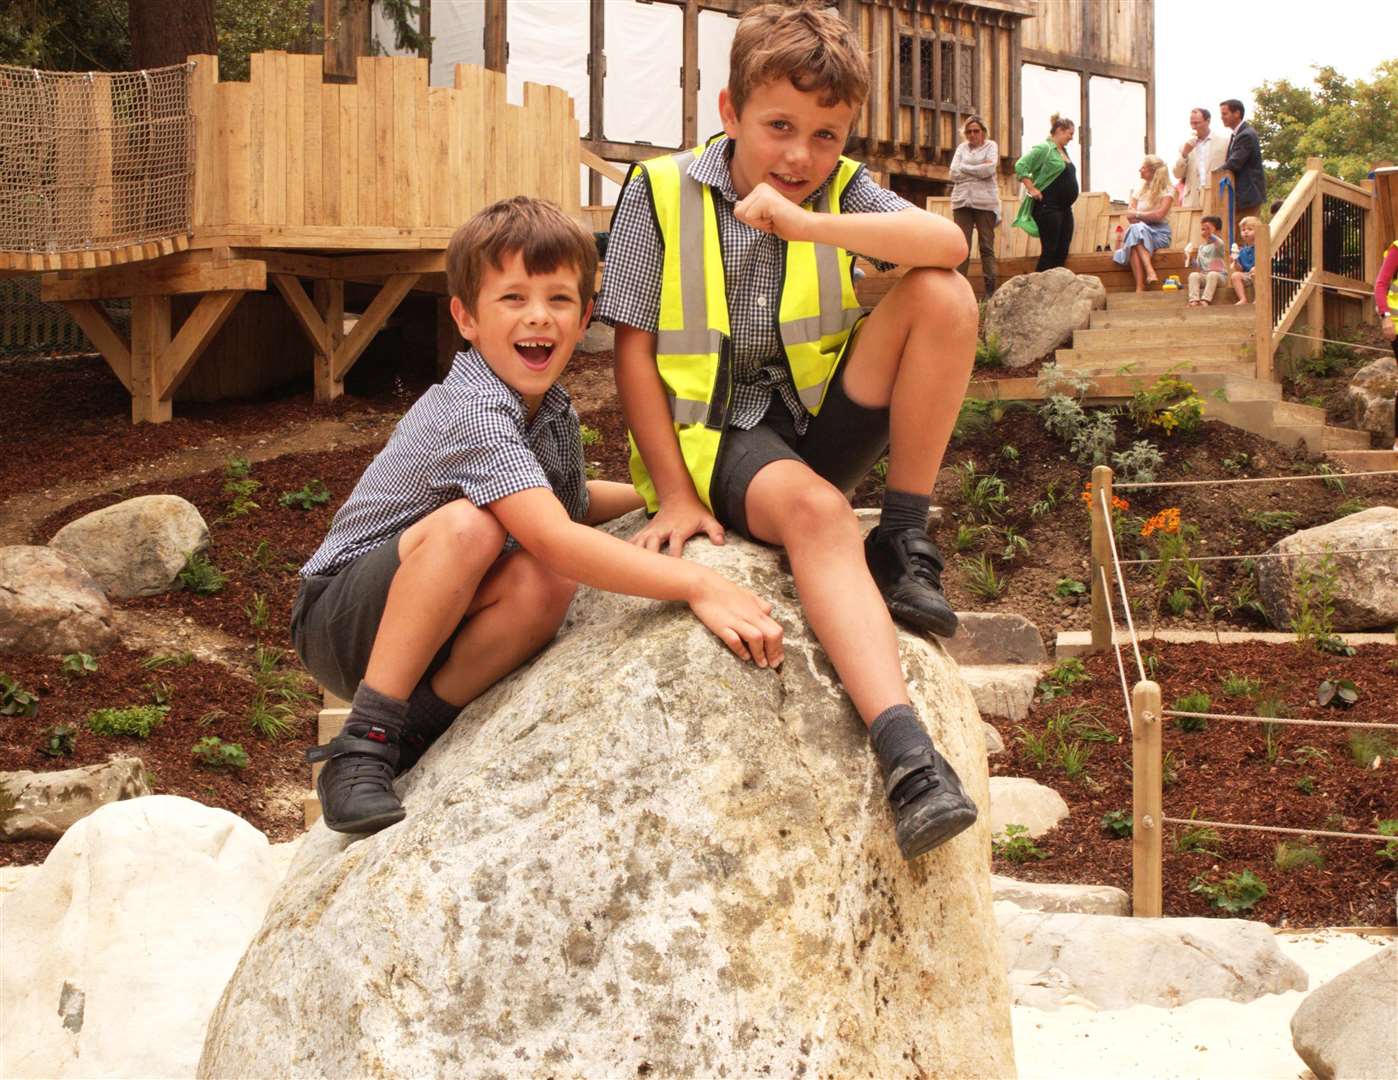 Boulders are being placed across the play area